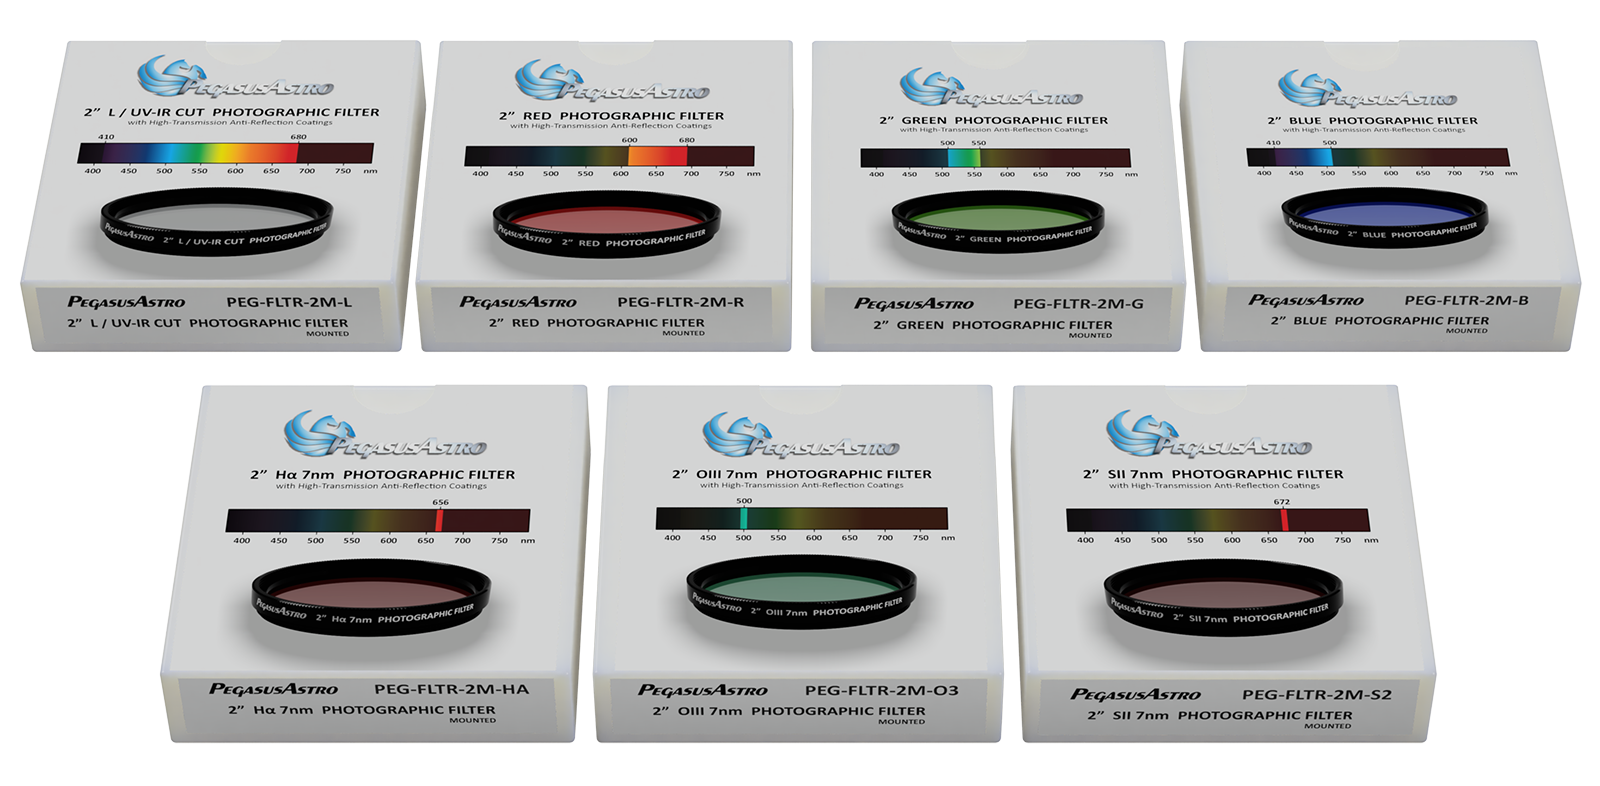 Pegasus Astro Photographic Filter - O3 7nm 2" Mounted Filter